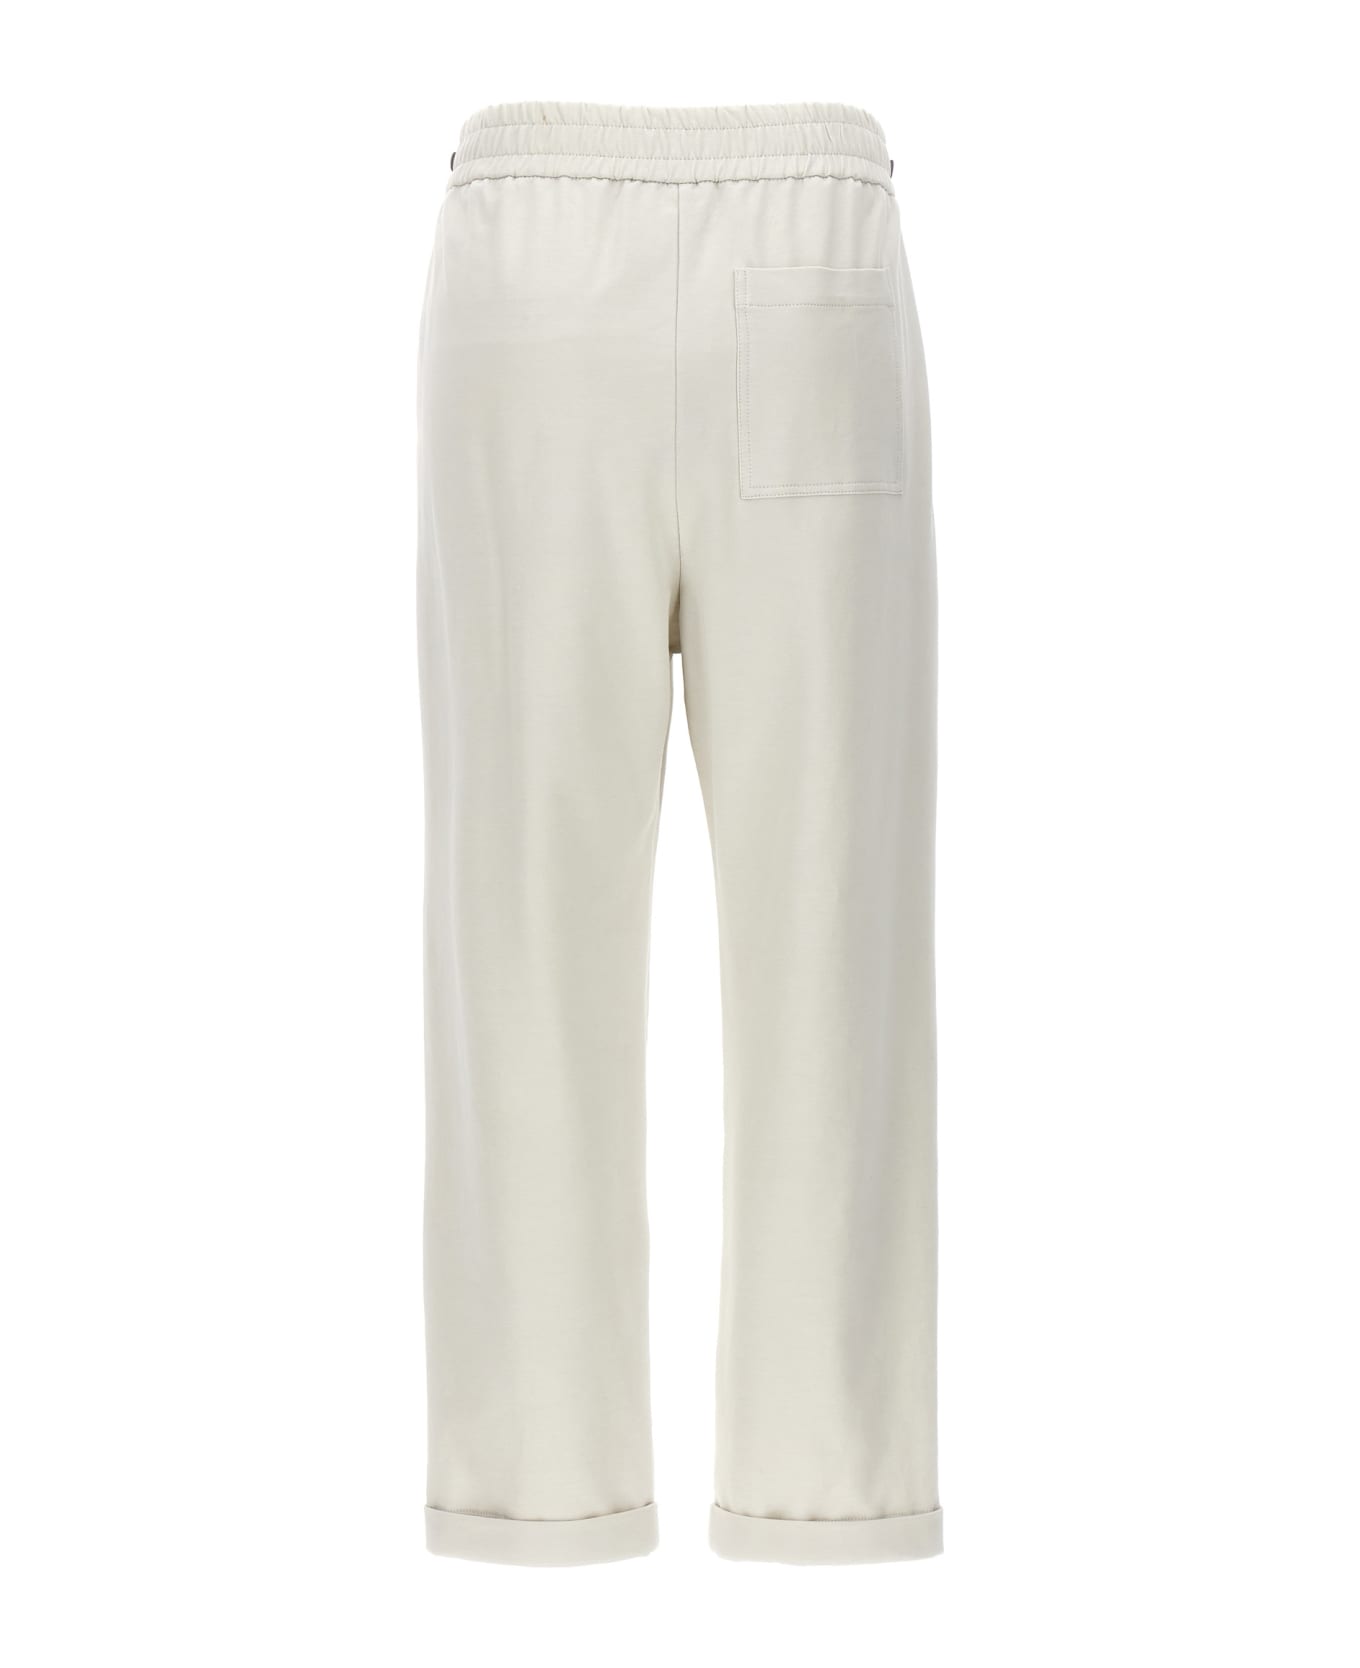 Brunello Cucinelli Pants With Front Pleats - White